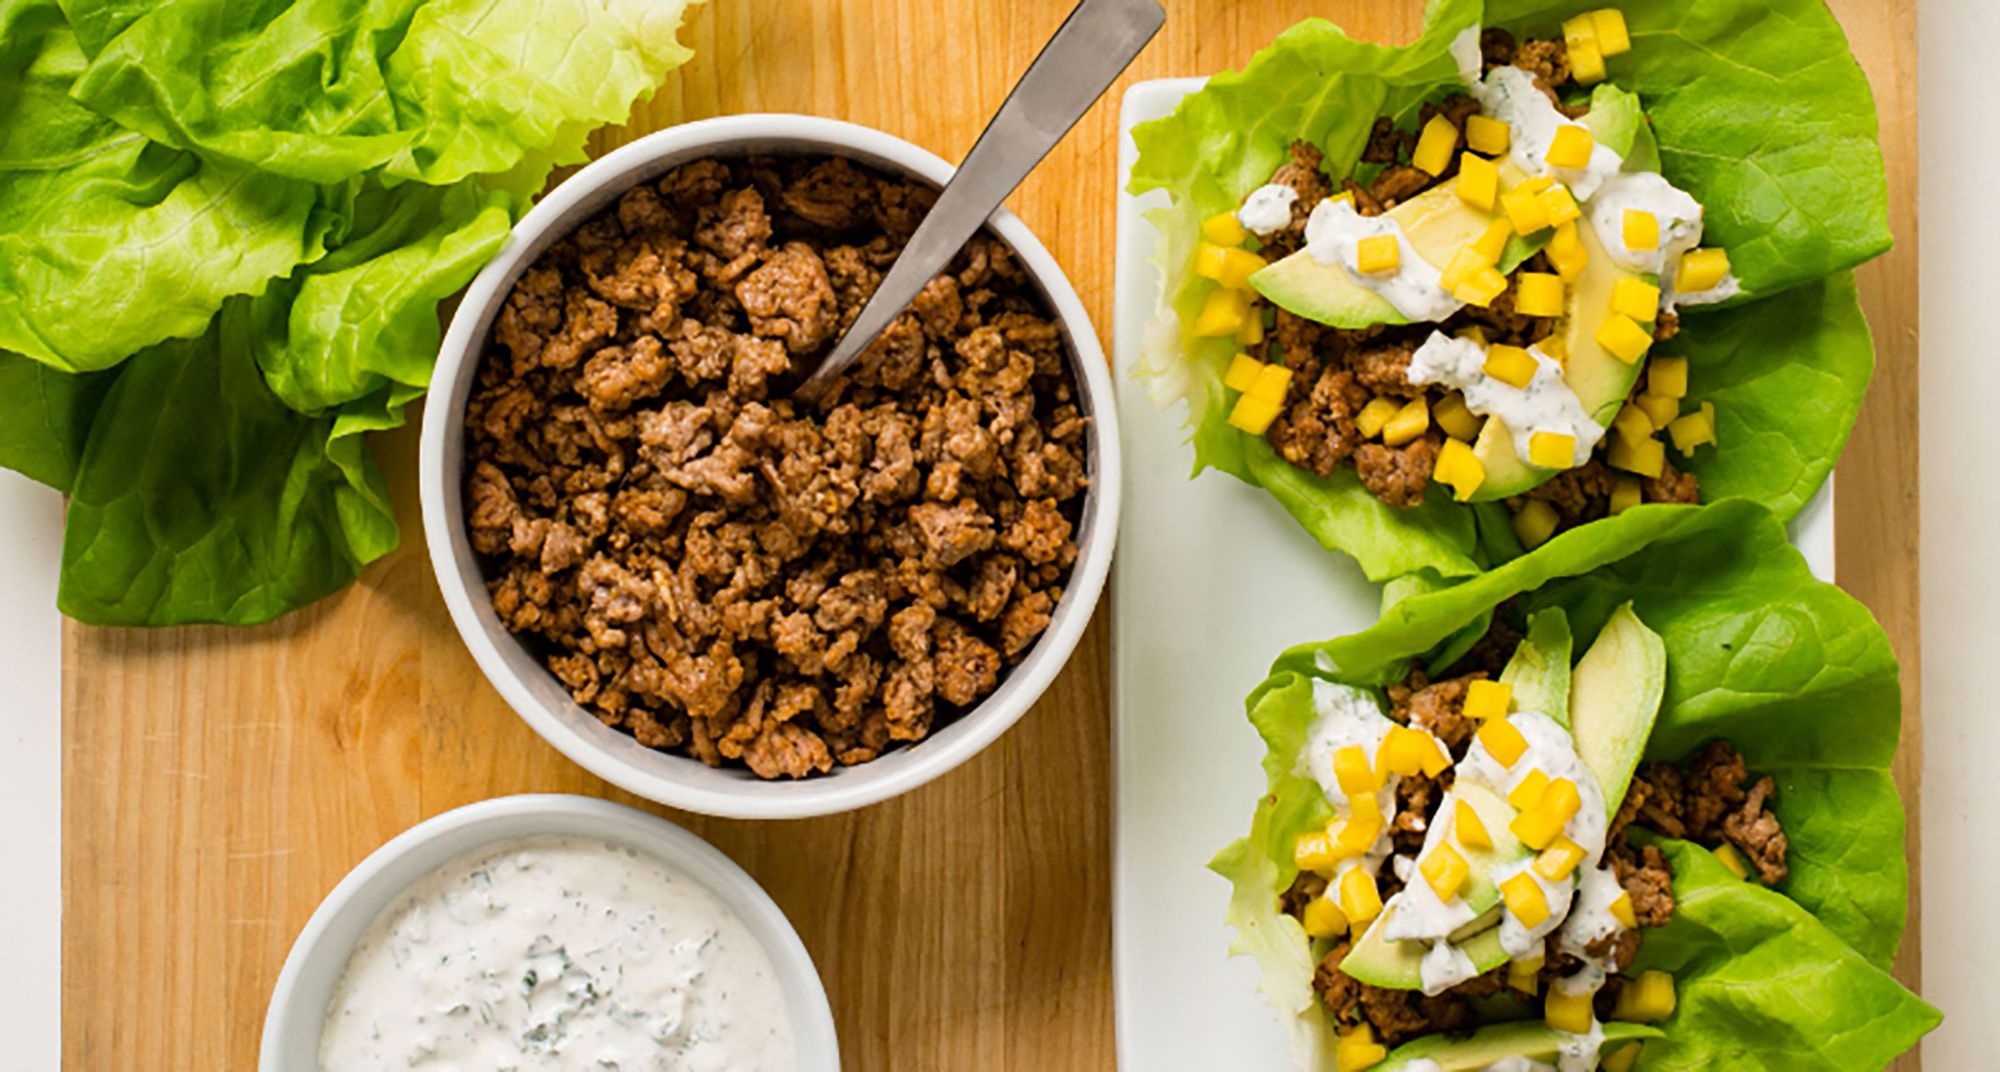 Add spiced pork lettuce wraps to your weekly dinner rotation